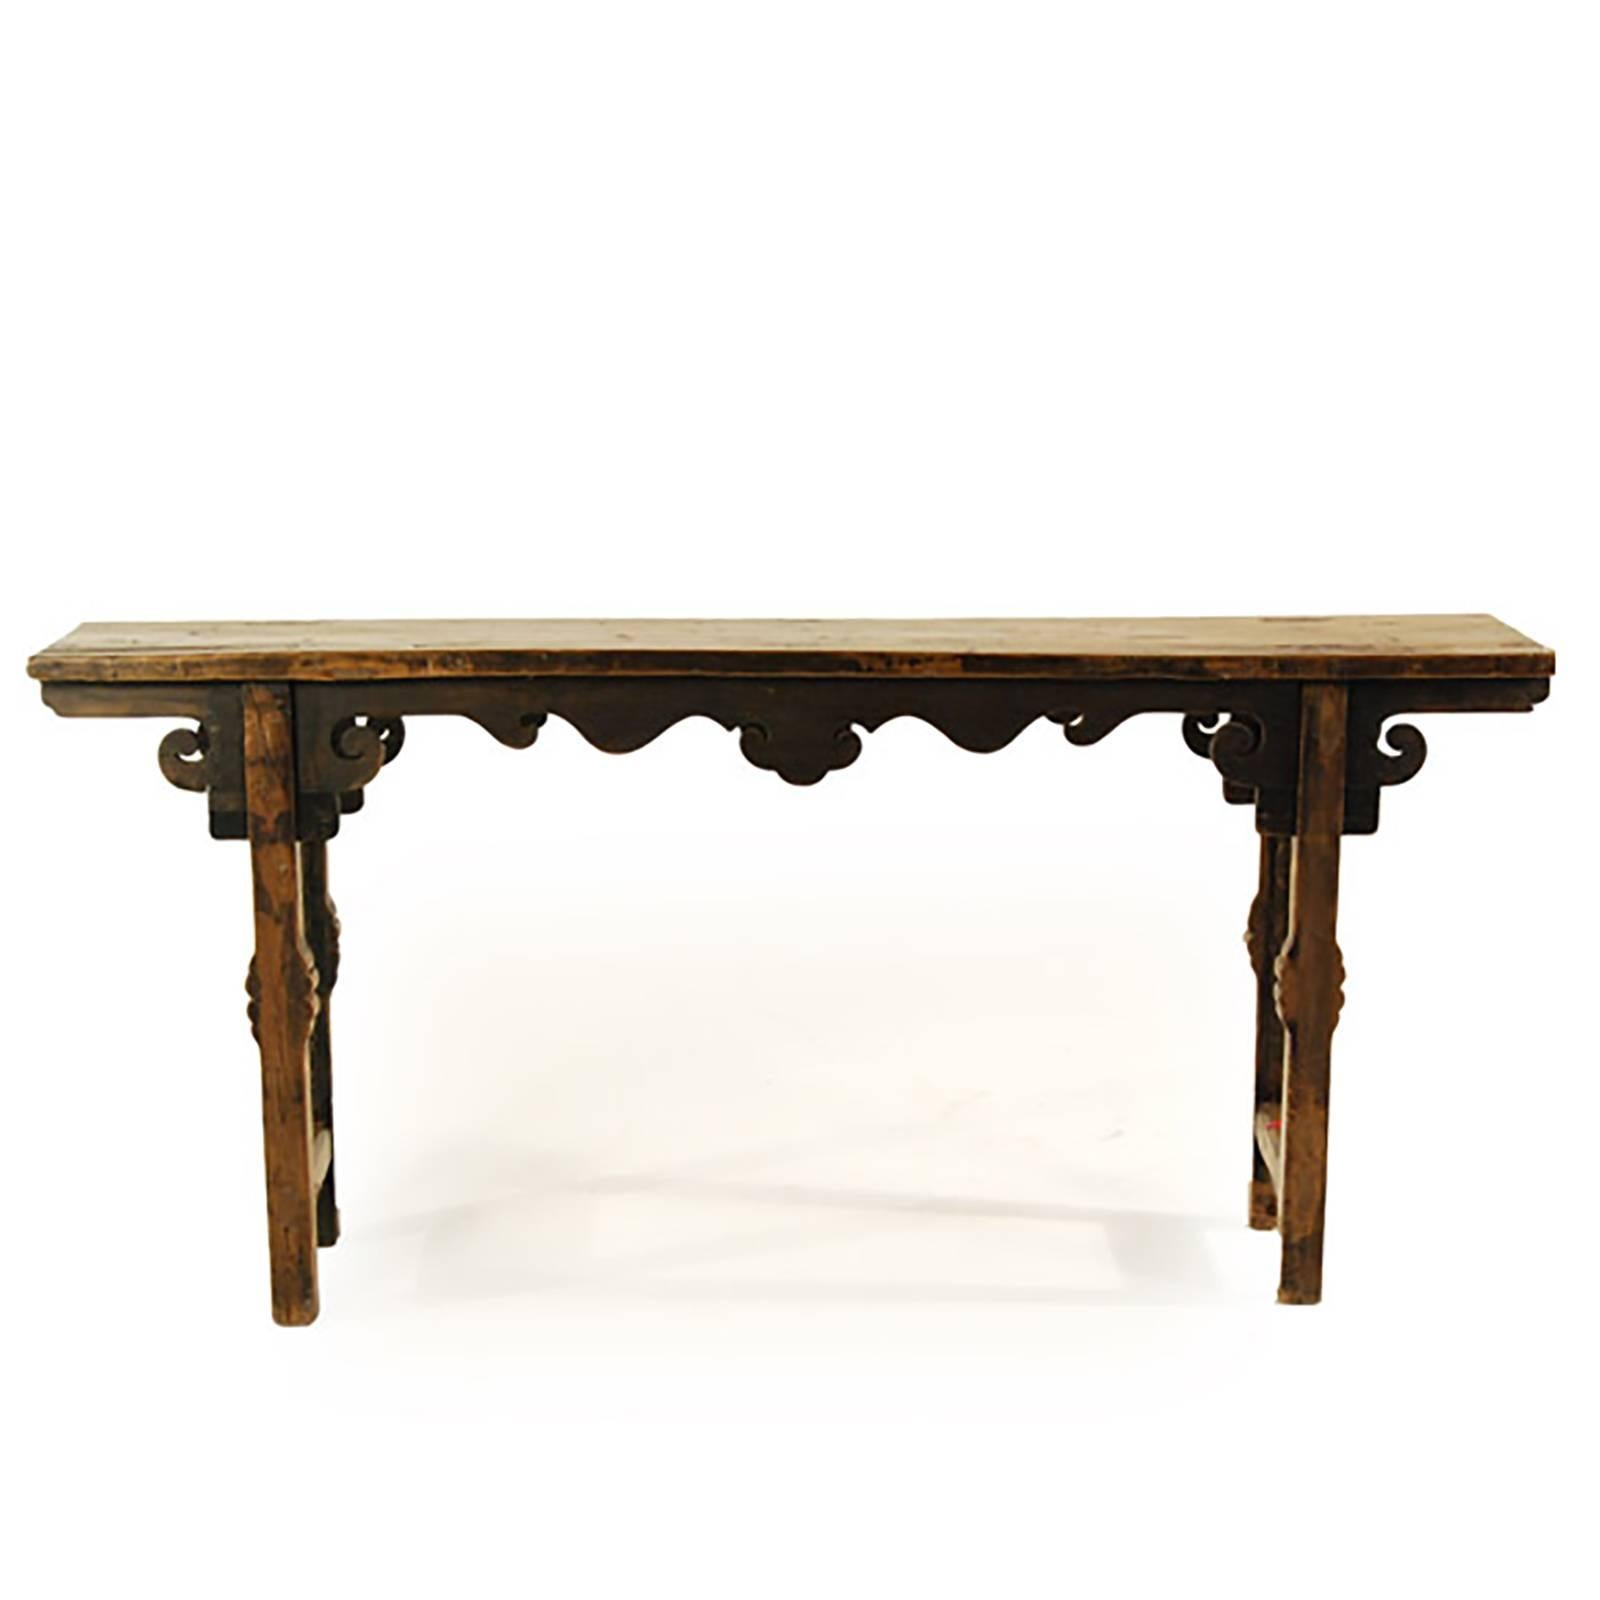 The artisan who carved this Provincial table out of pine added personal touches: highly carved apron, legs, and spandrels in the form of lingzi (auspicious mushroom). It was made over 150 years ago in the Gansu region of China. Long, narrow tables,